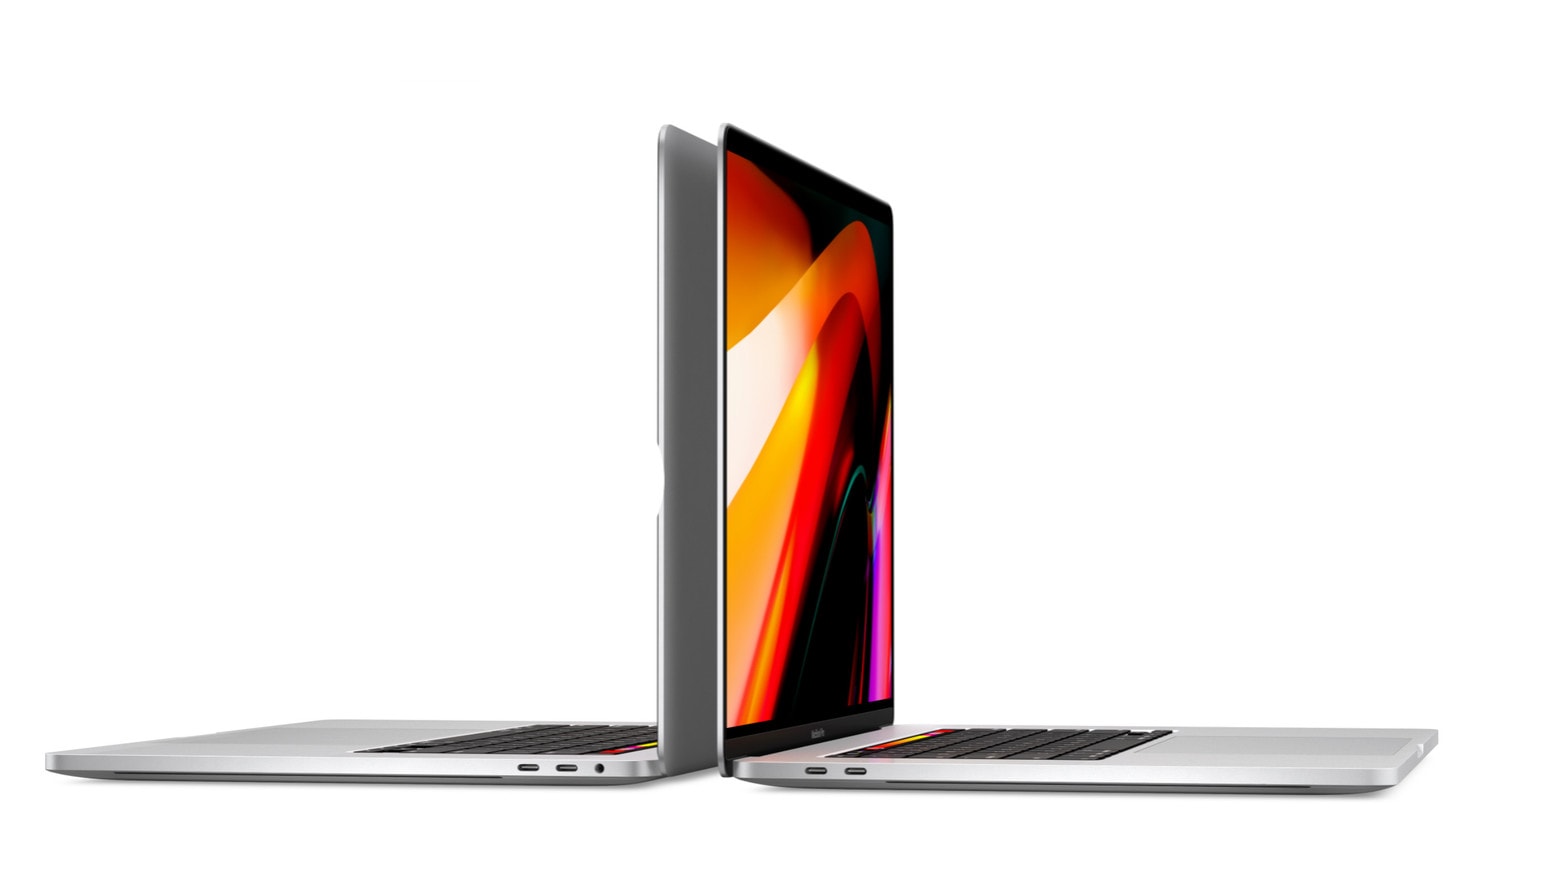 The 16-inch MacBook Pro isn’t quite as svelte as it could be.